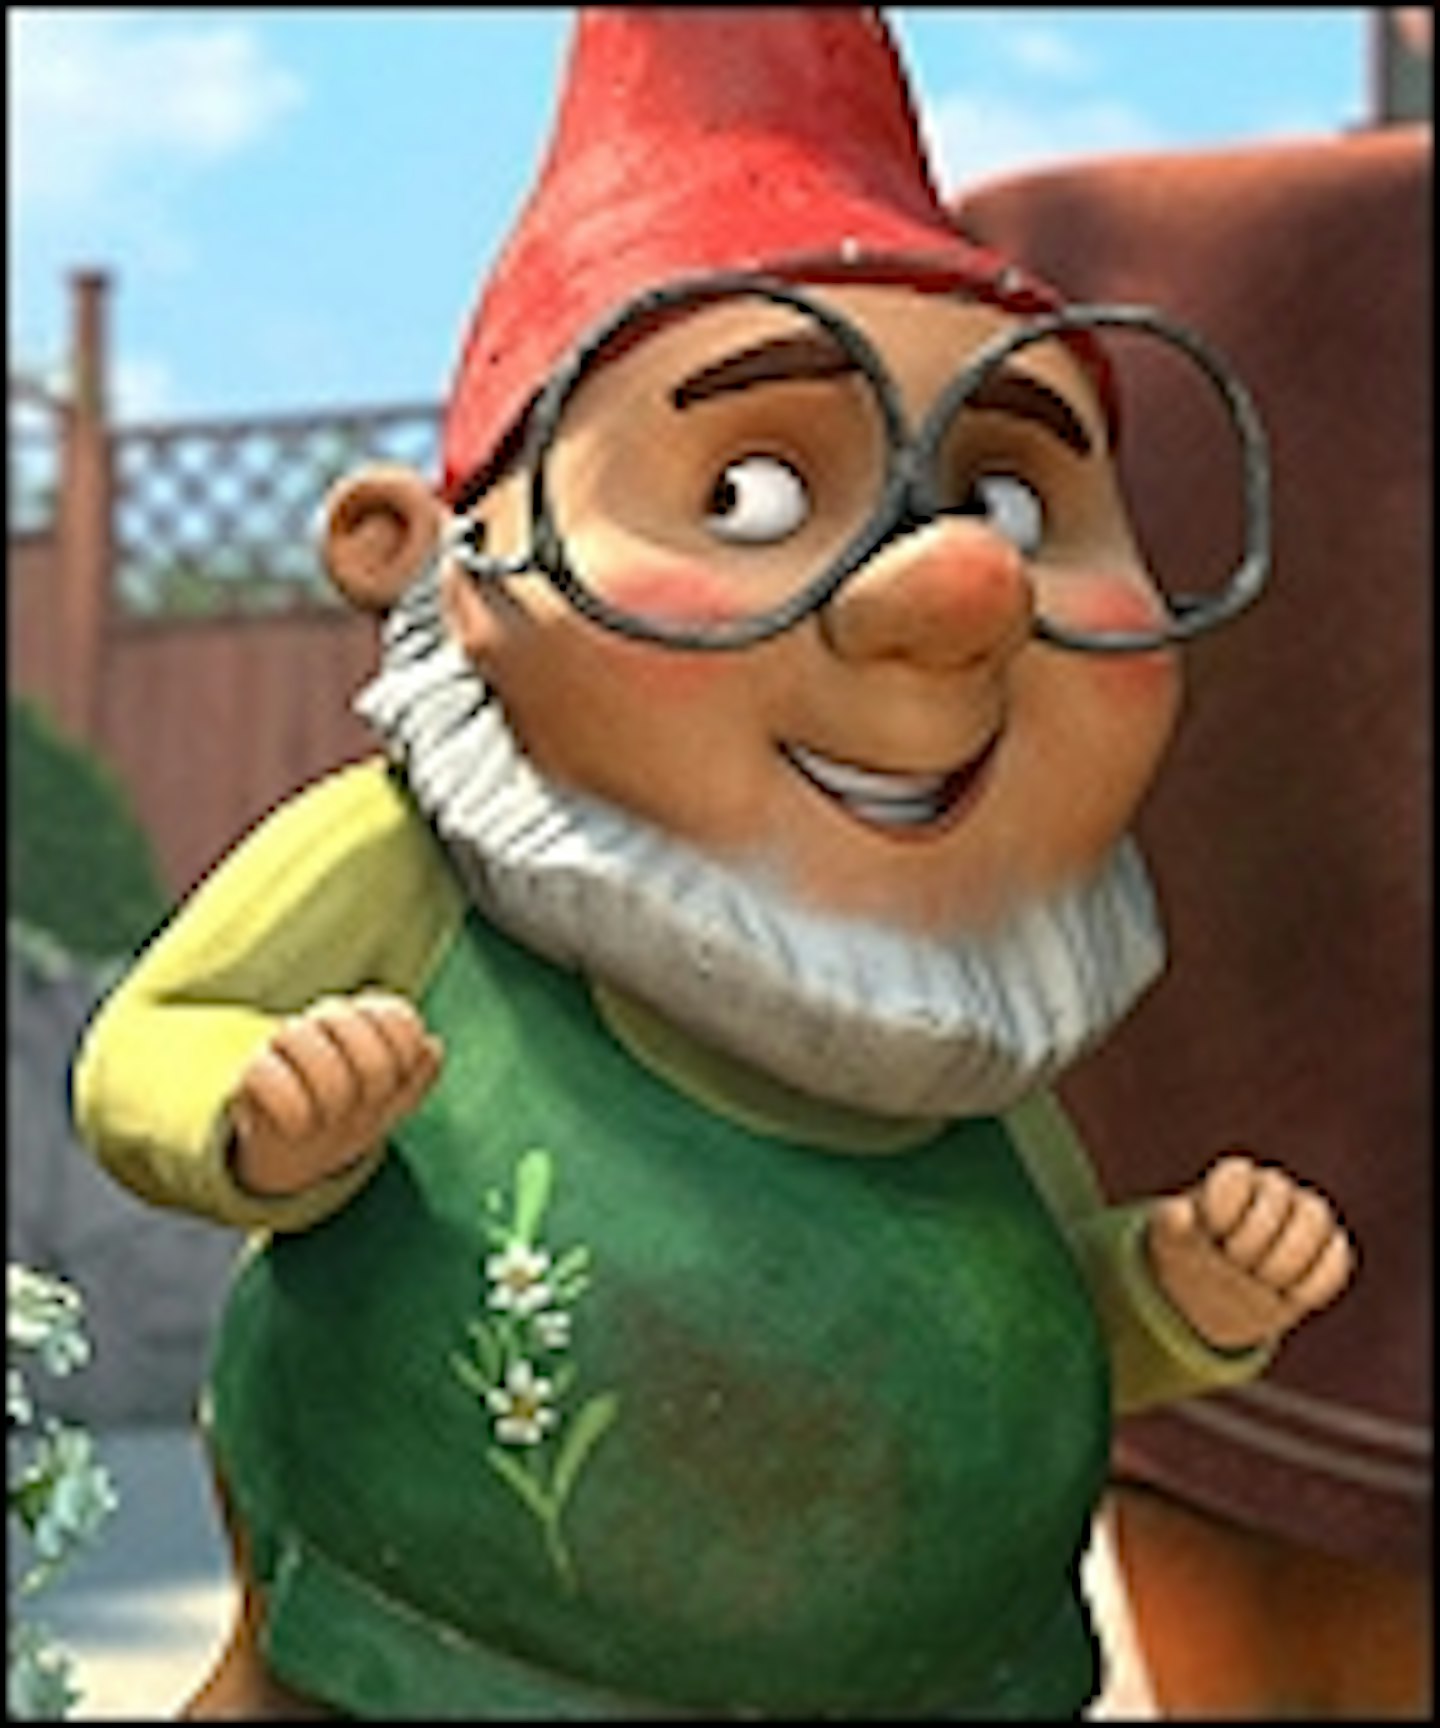 Ready For Gnomeo & Juliet 2?